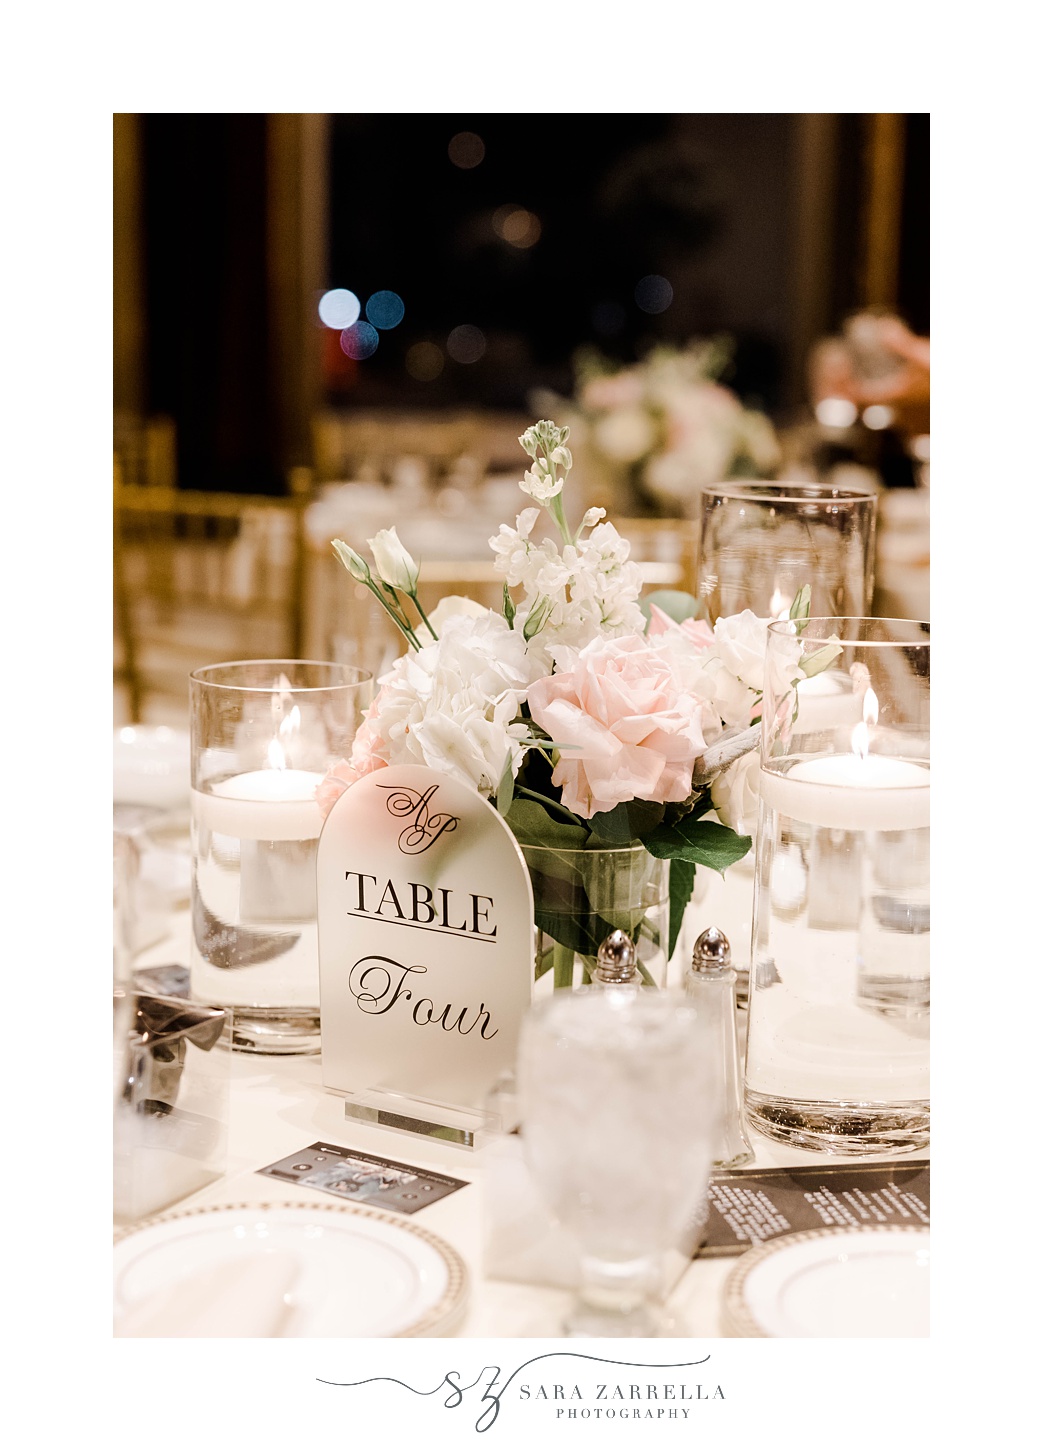 table numbers rest against pink and white rose centerpiece 